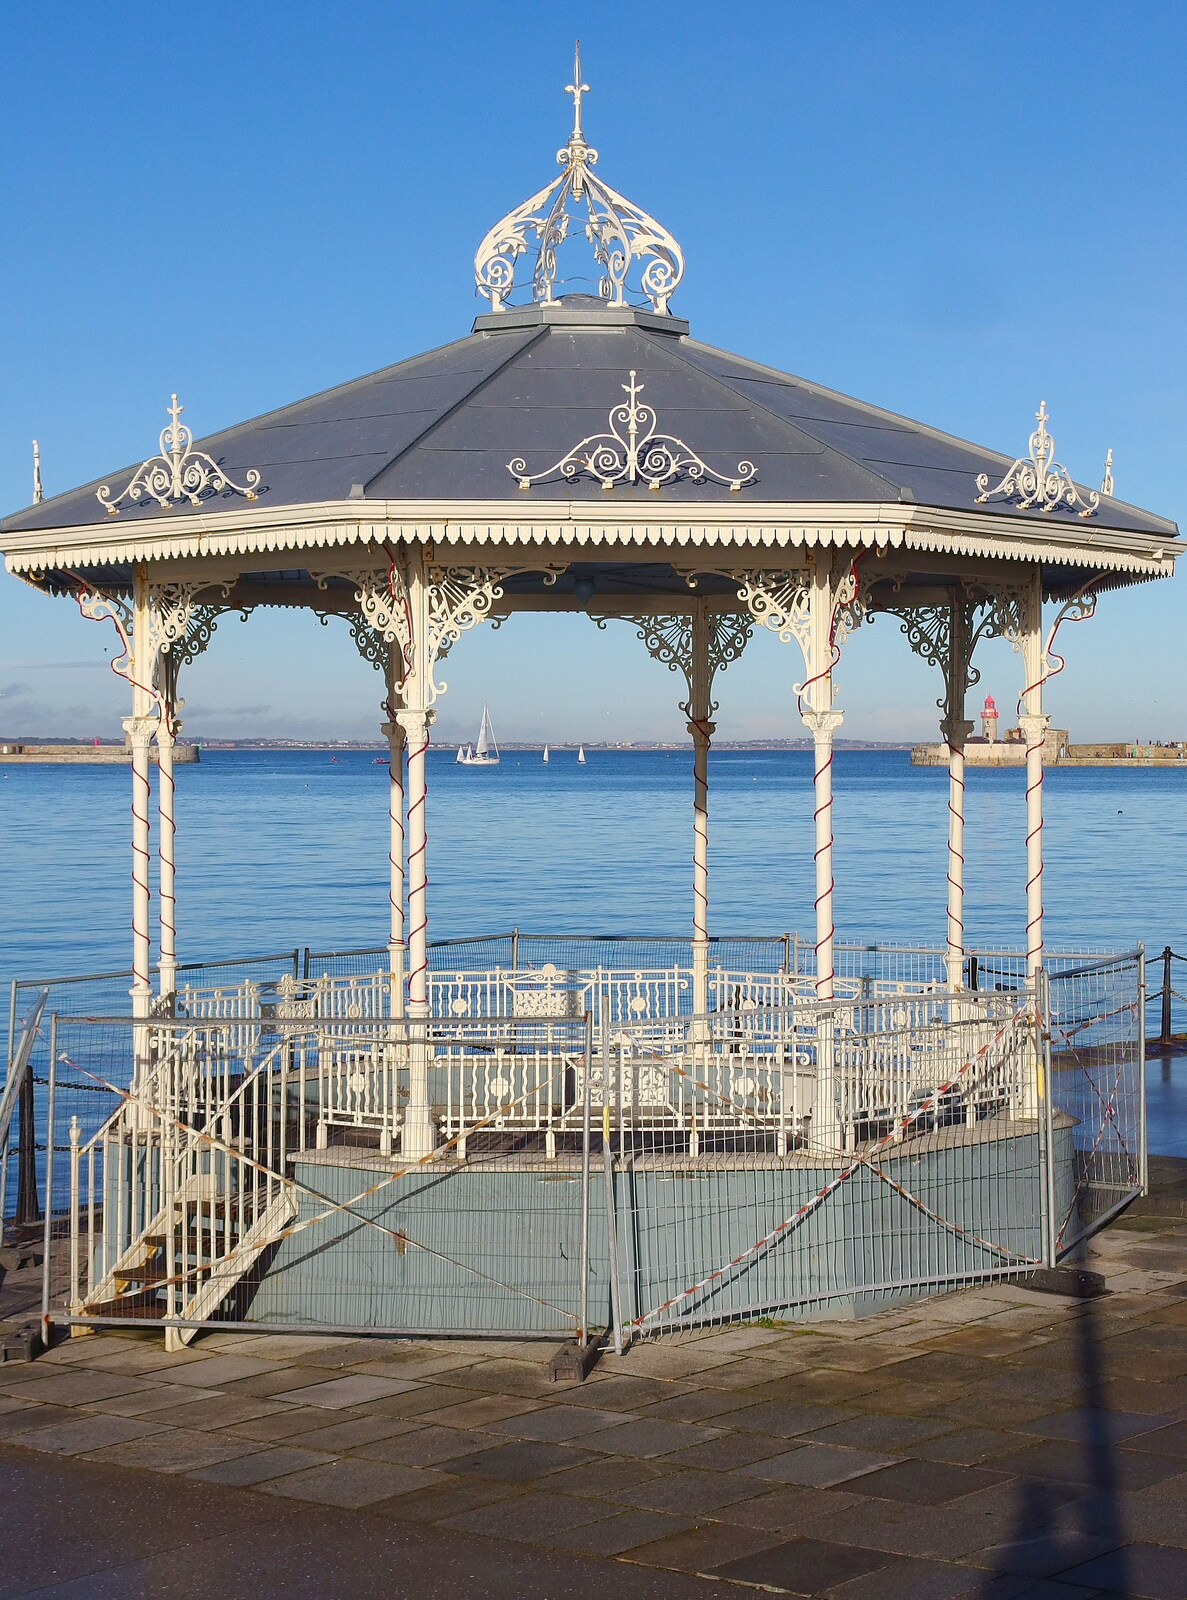 The bandstand is closed off from Dun Laoghaire and an Electrical Disaster, Monkstown, County Dublin, Ireland - 4th January 2014